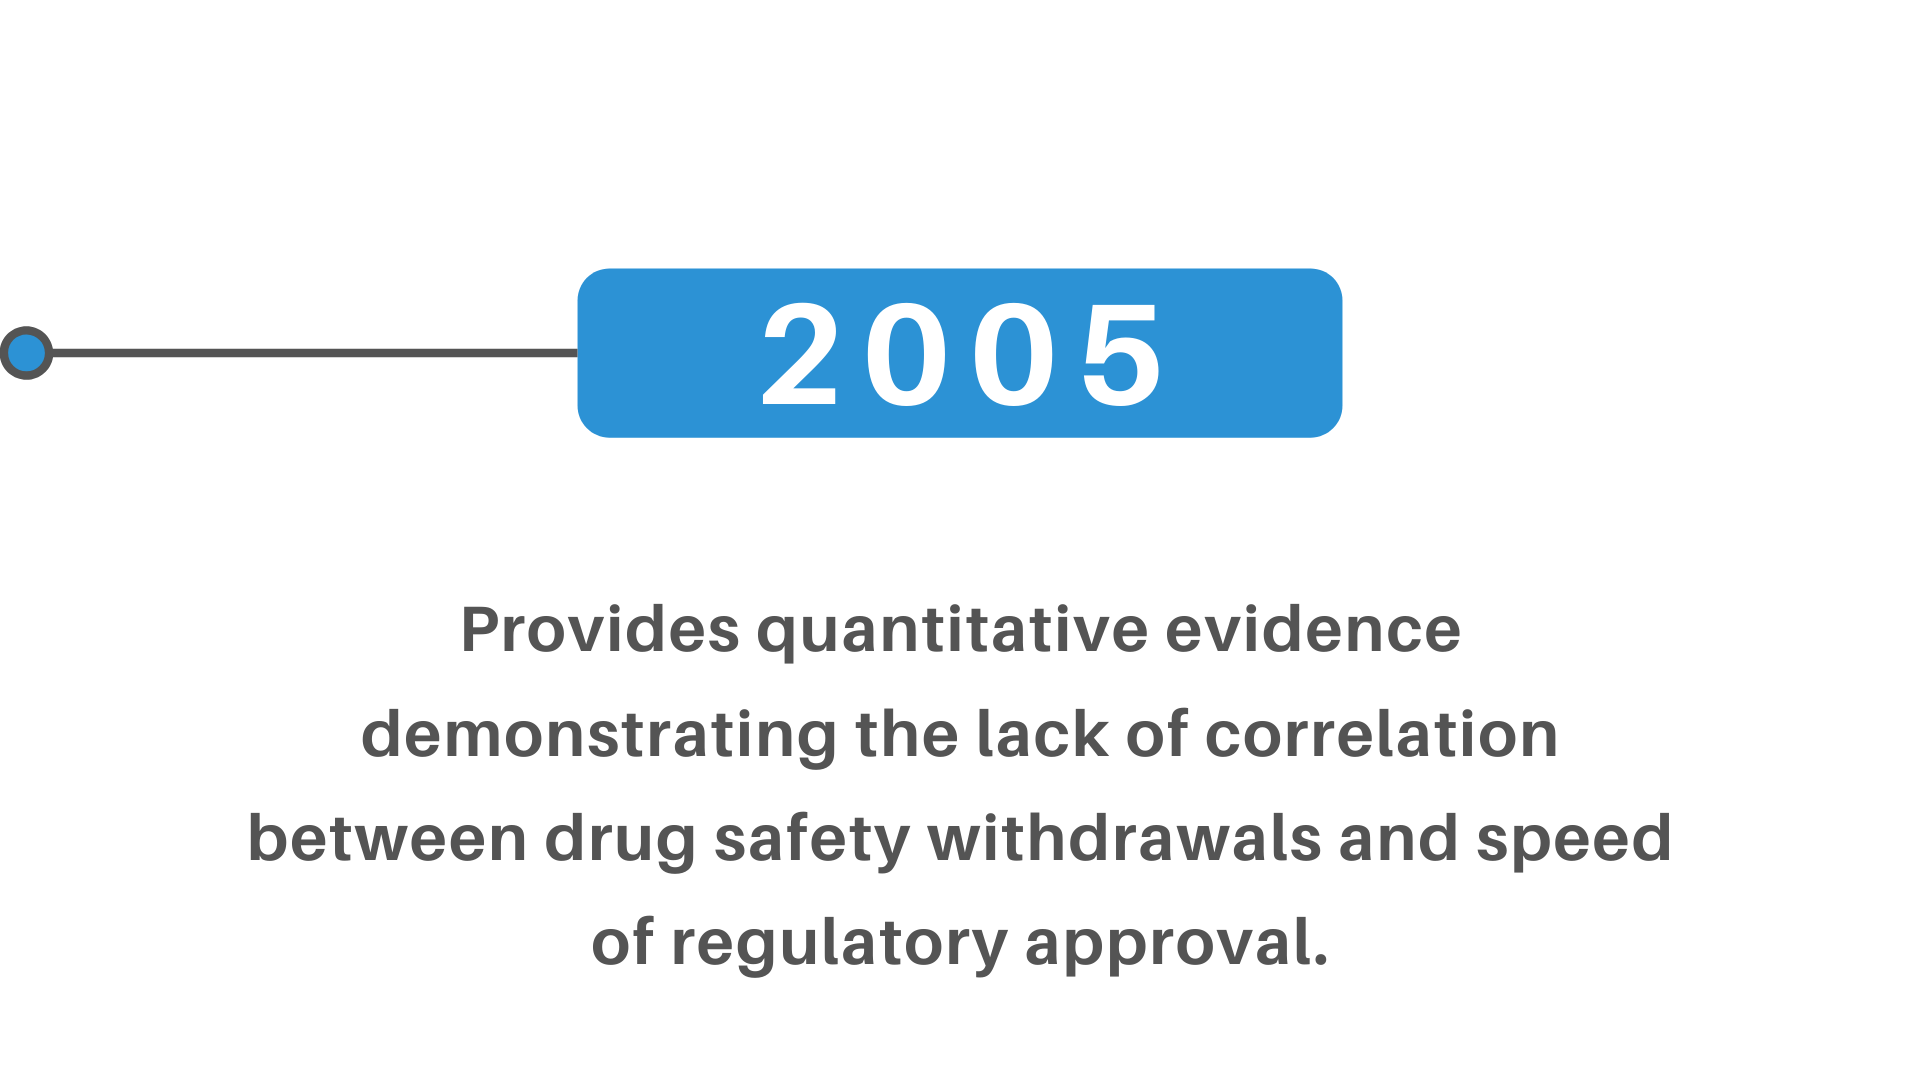 drug safety withdrawals speed regulatory approval lack of correlation